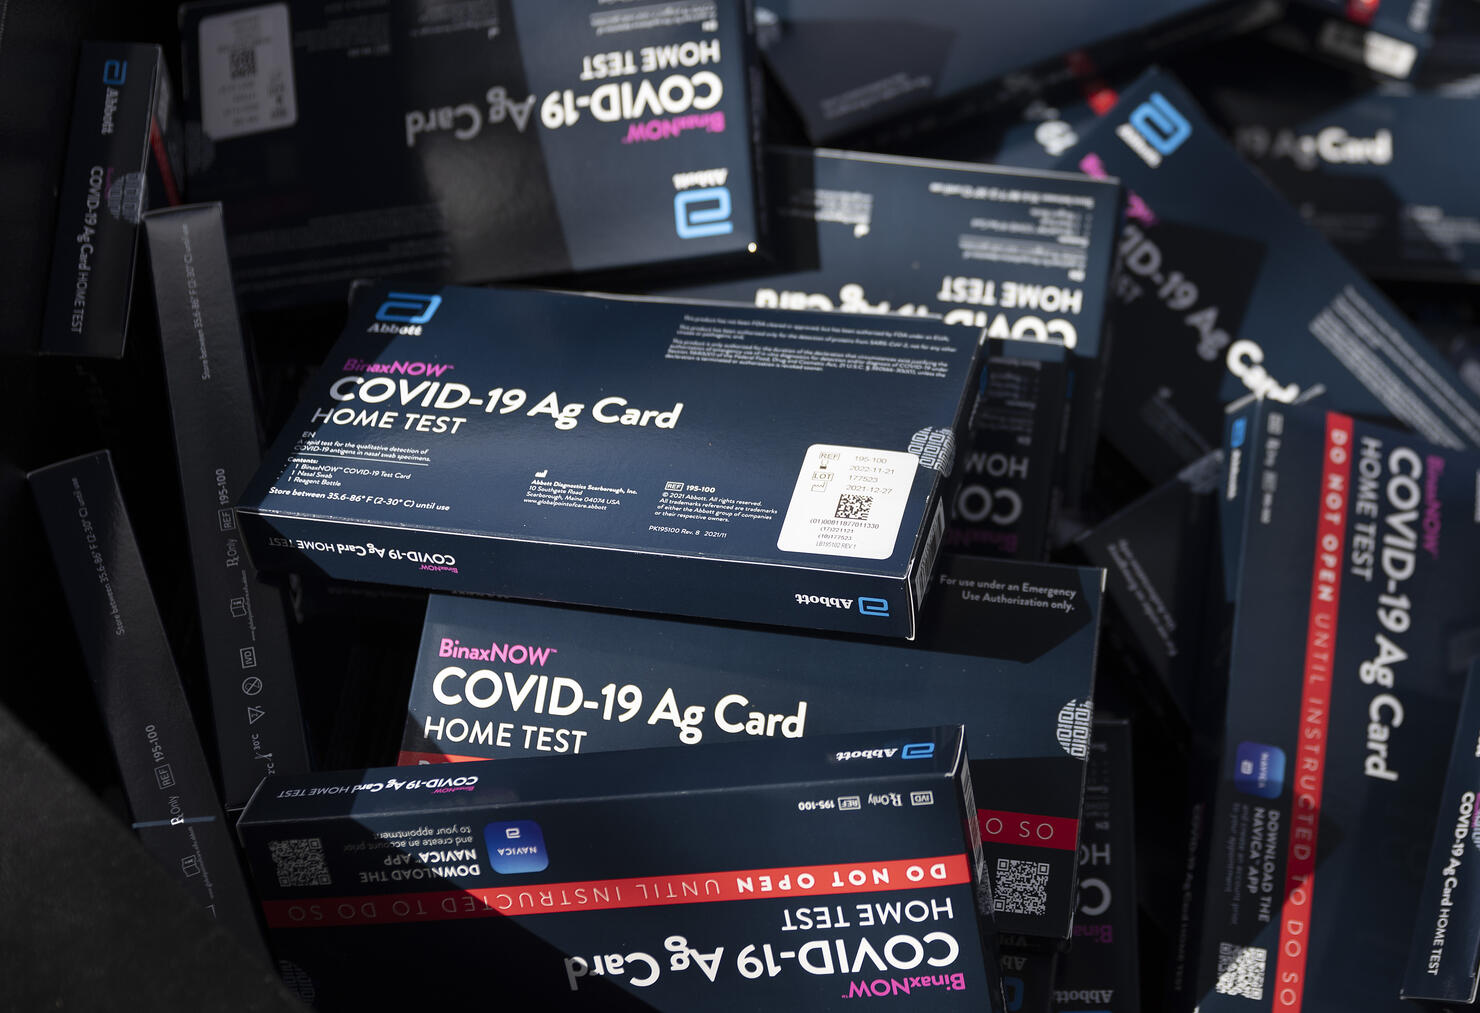 Florida's Broward County Hands Out Free At-Home COVID Rapid Test Kits